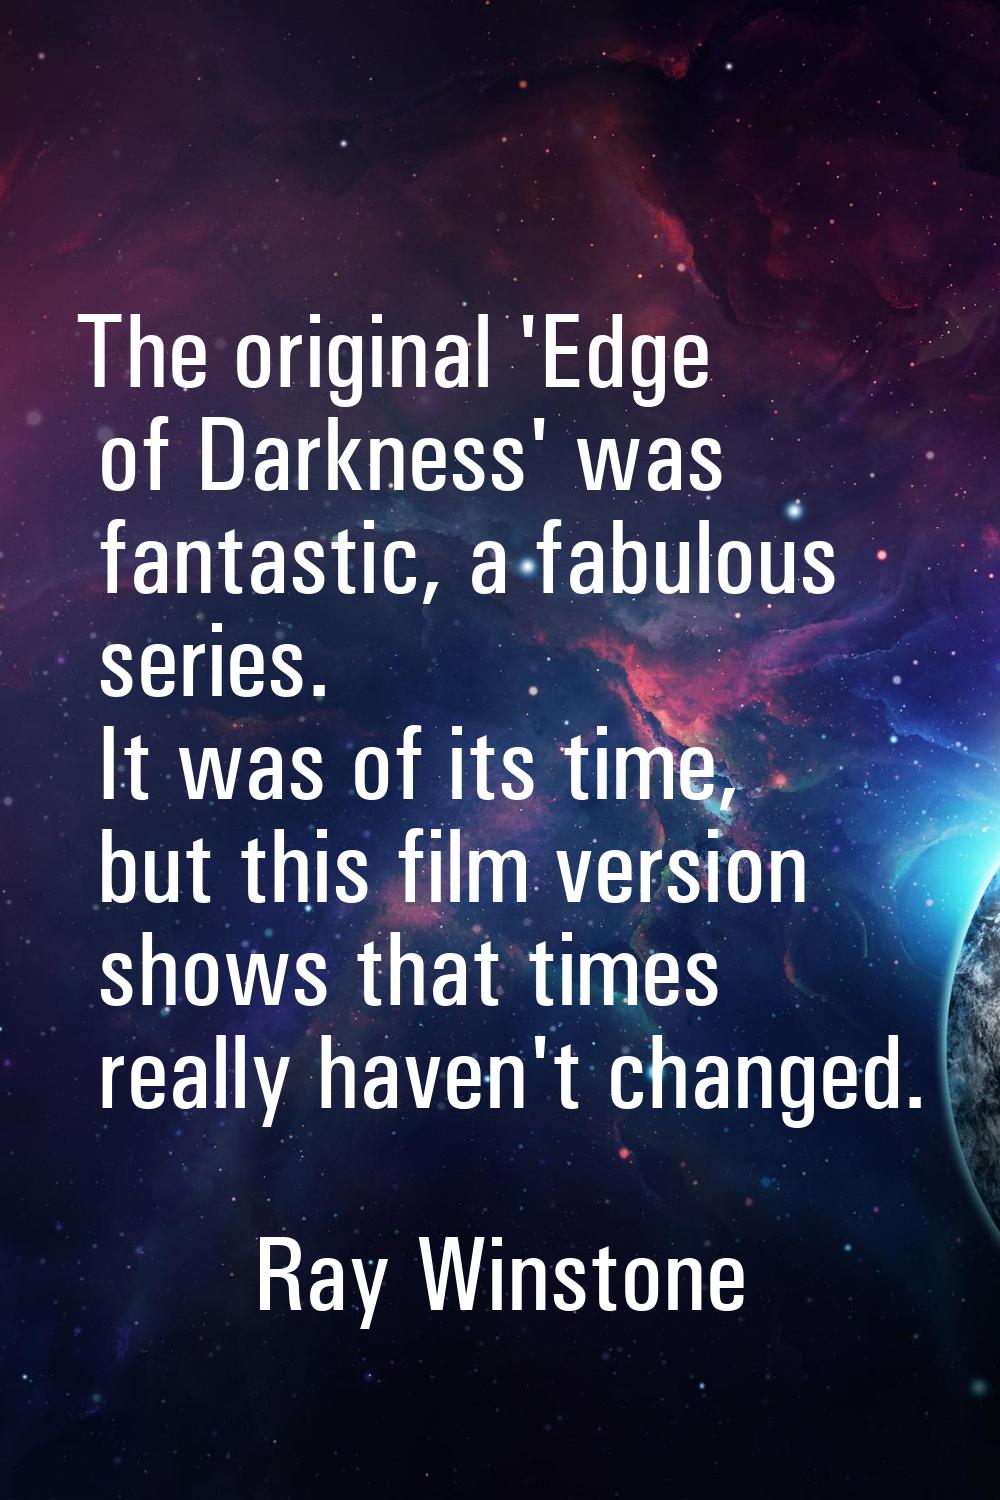 The original 'Edge of Darkness' was fantastic, a fabulous series. It was of its time, but this film